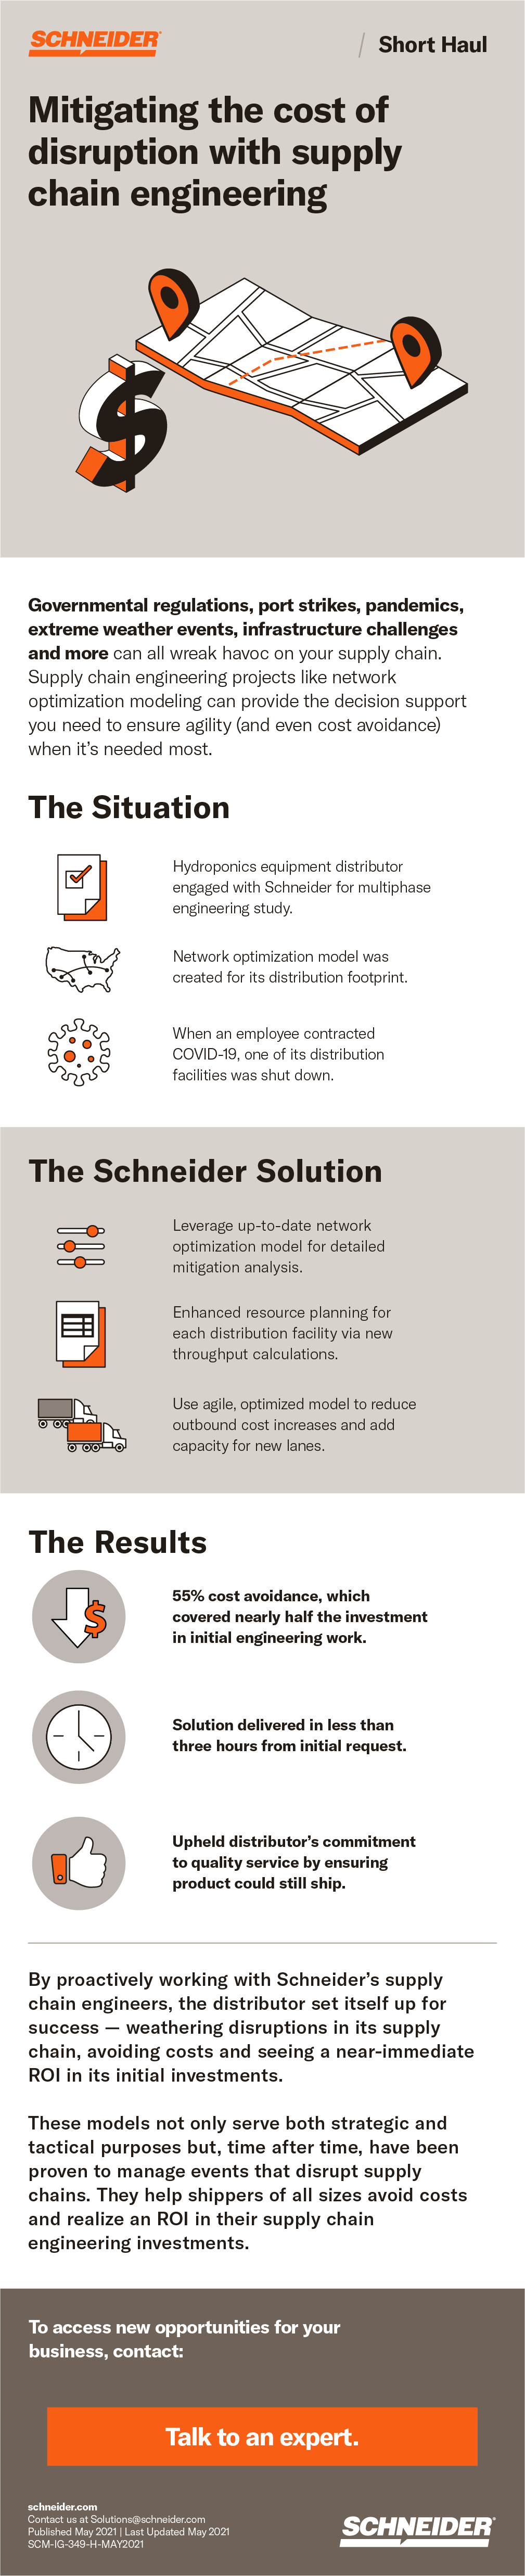 Infographic of how a distributor mitigated supply chain disruption with network optimization model